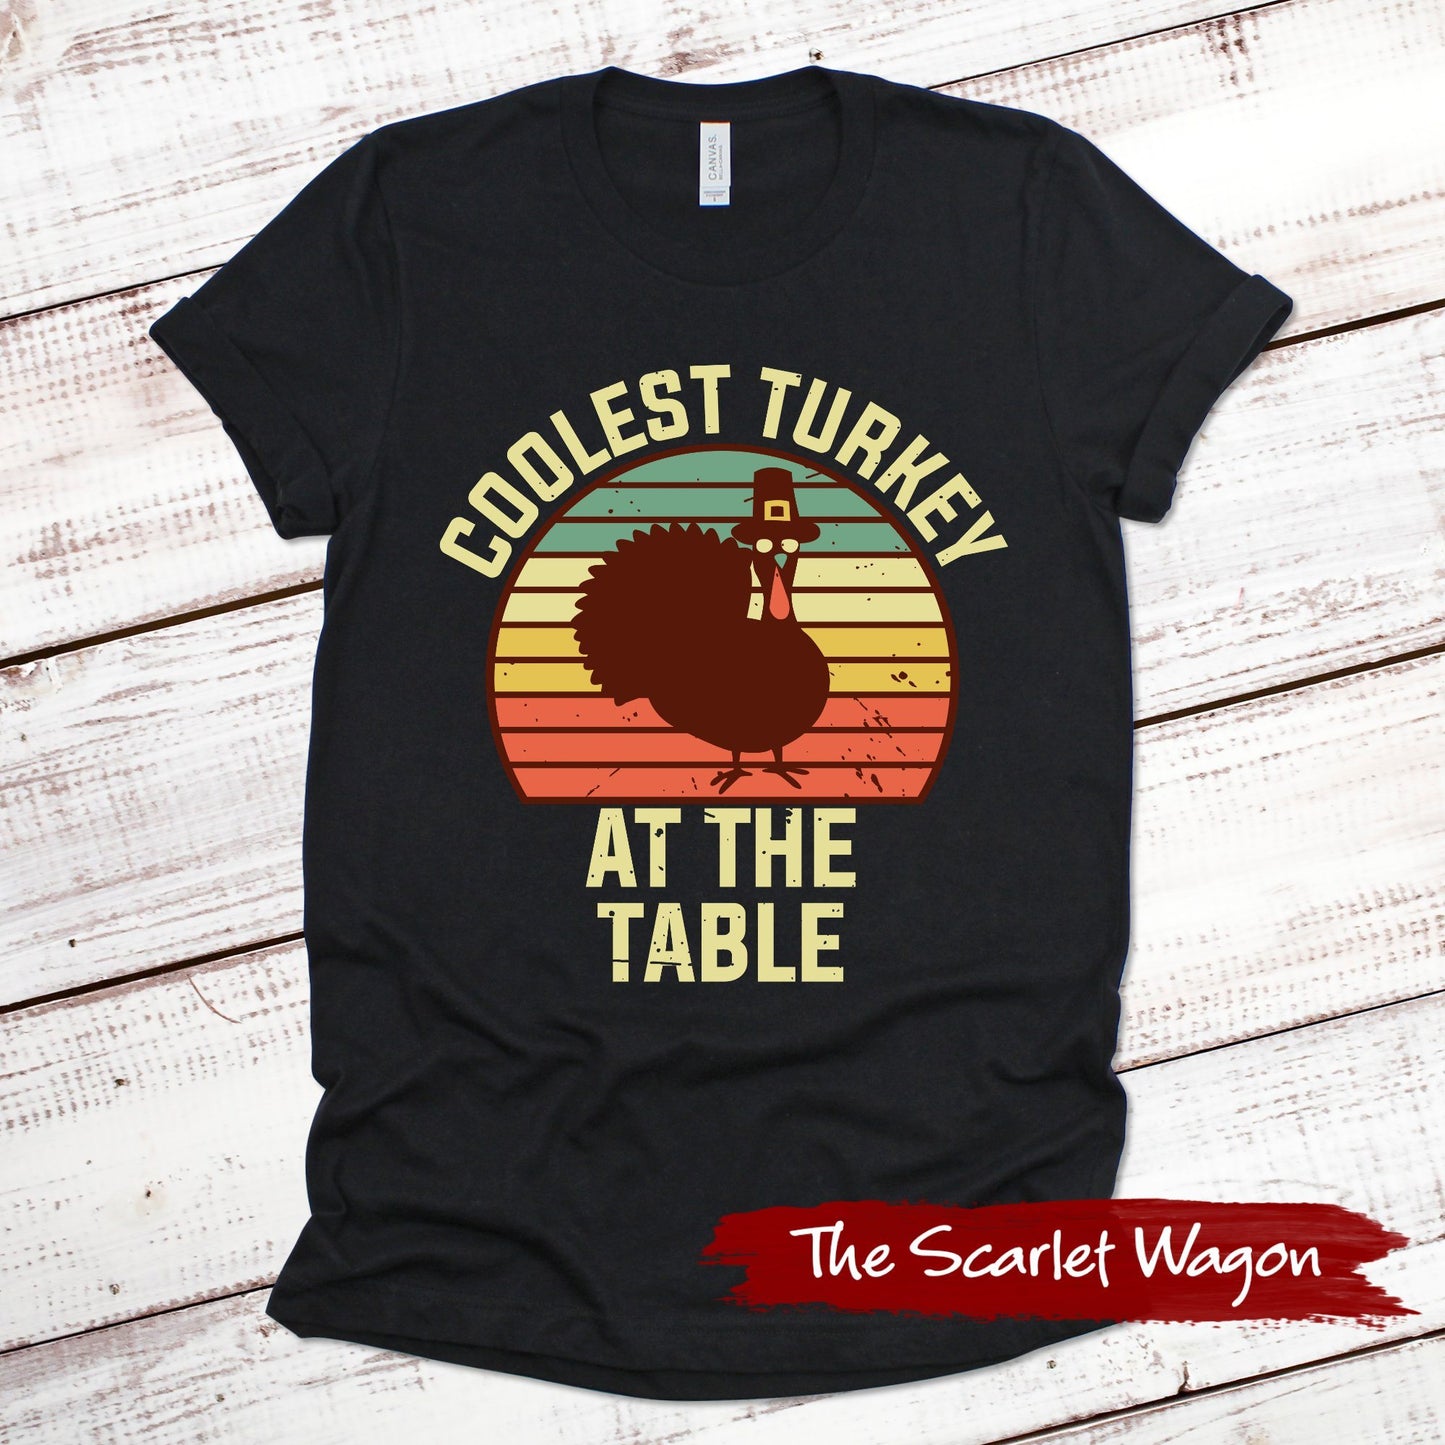 Coolest Turkey at the Table Fall Shirts Scarlet Wagon Black XS 